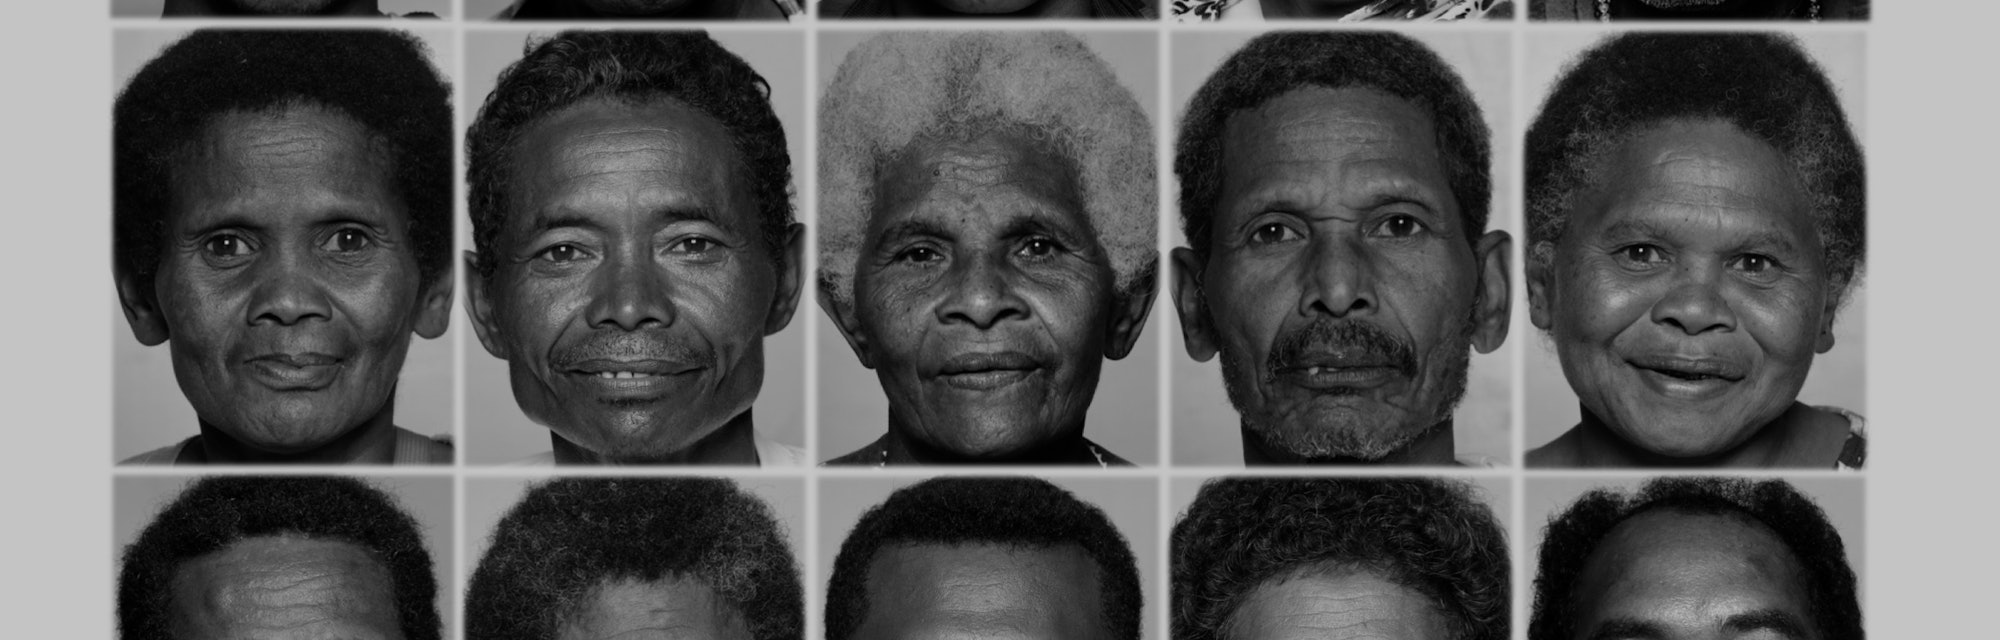 Grid of black-and-white portraits of Negrito population from the Philippines.